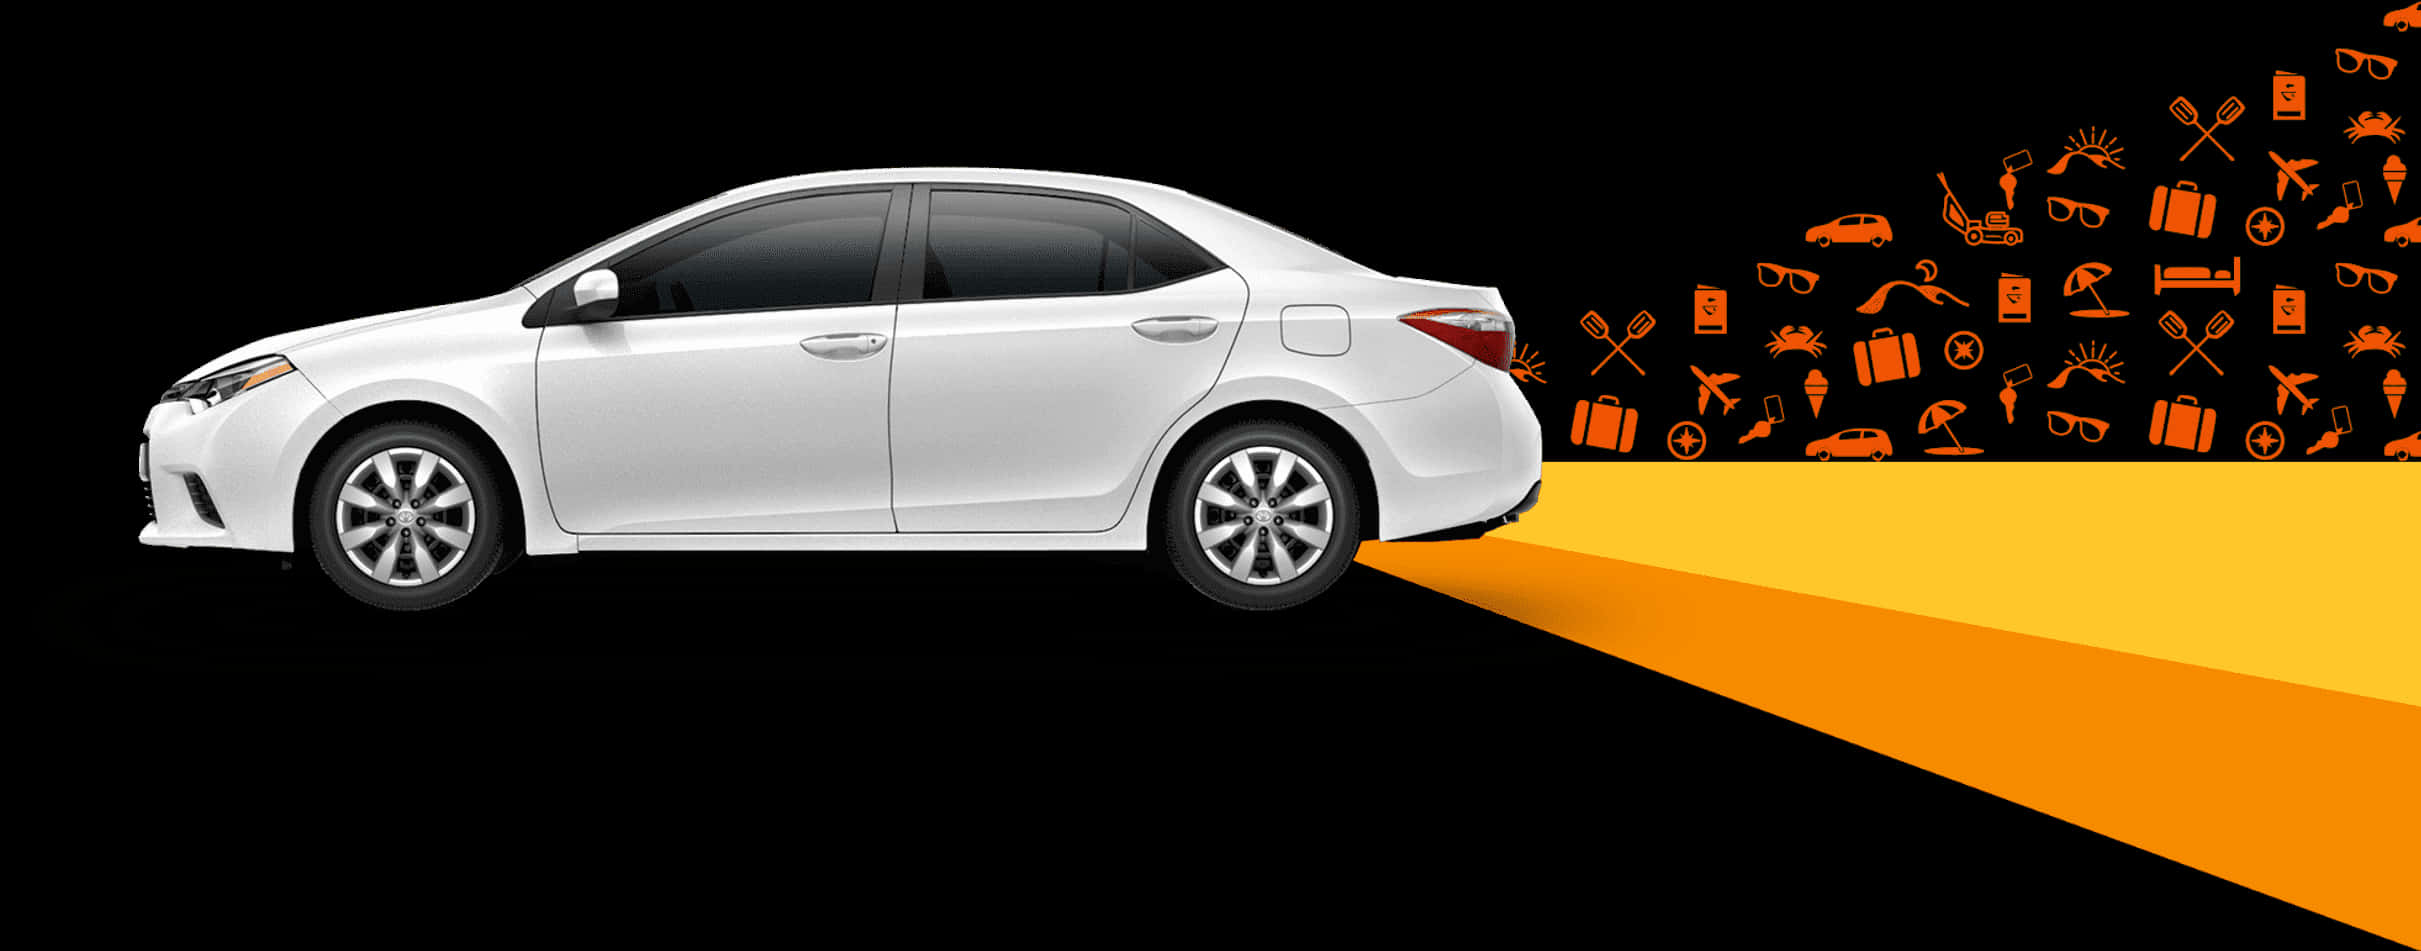 White Sedan Car Side Viewon Abstract Background.jpg PNG image